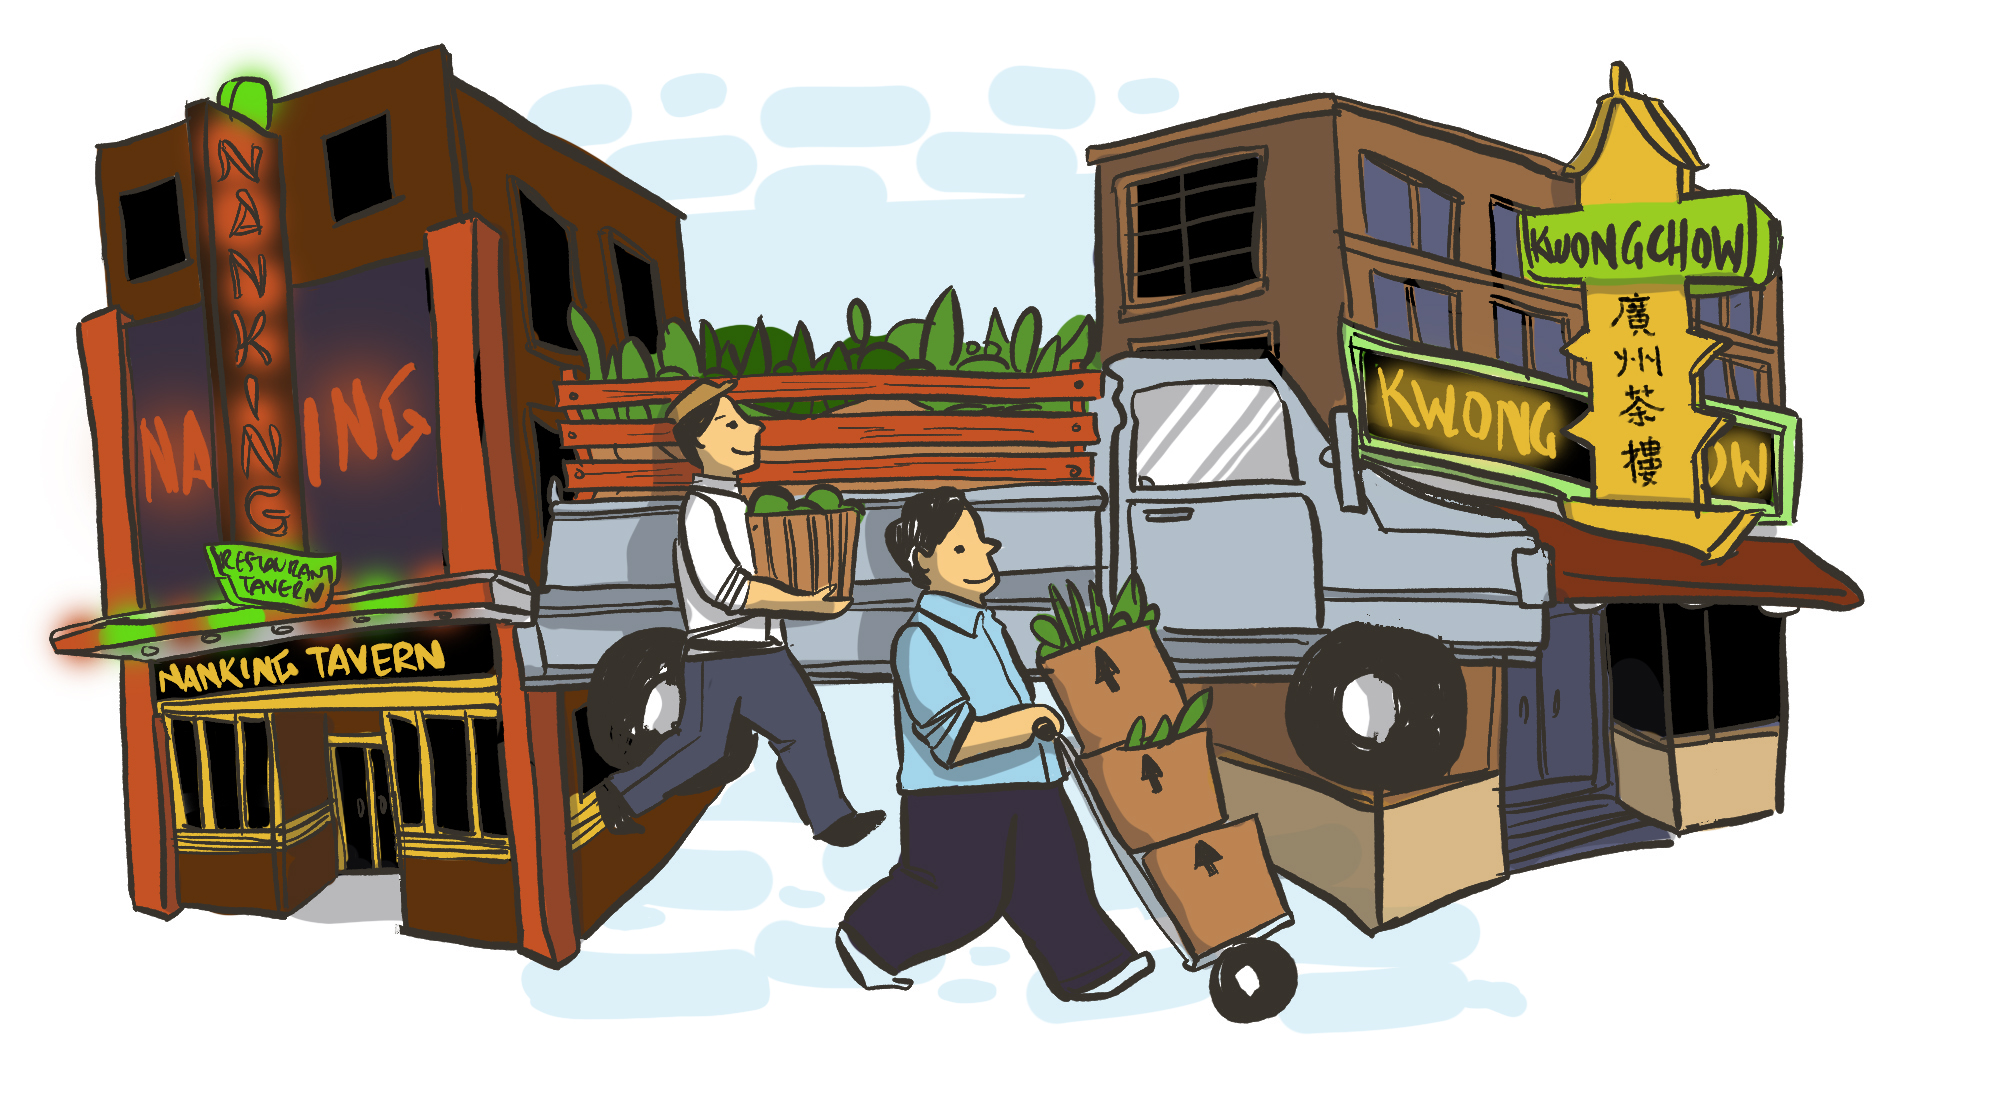 A illustration of Chong Family Farm doing delivery to Chinatown. The background of the image depict two Chinese restaurants in Toronto's old Chinatown, Nanking in the left and Kuang Chow on the right. In front of the buildings, the illustration depict a truck with vegetables inside, and two person carrying crates of vegetable.